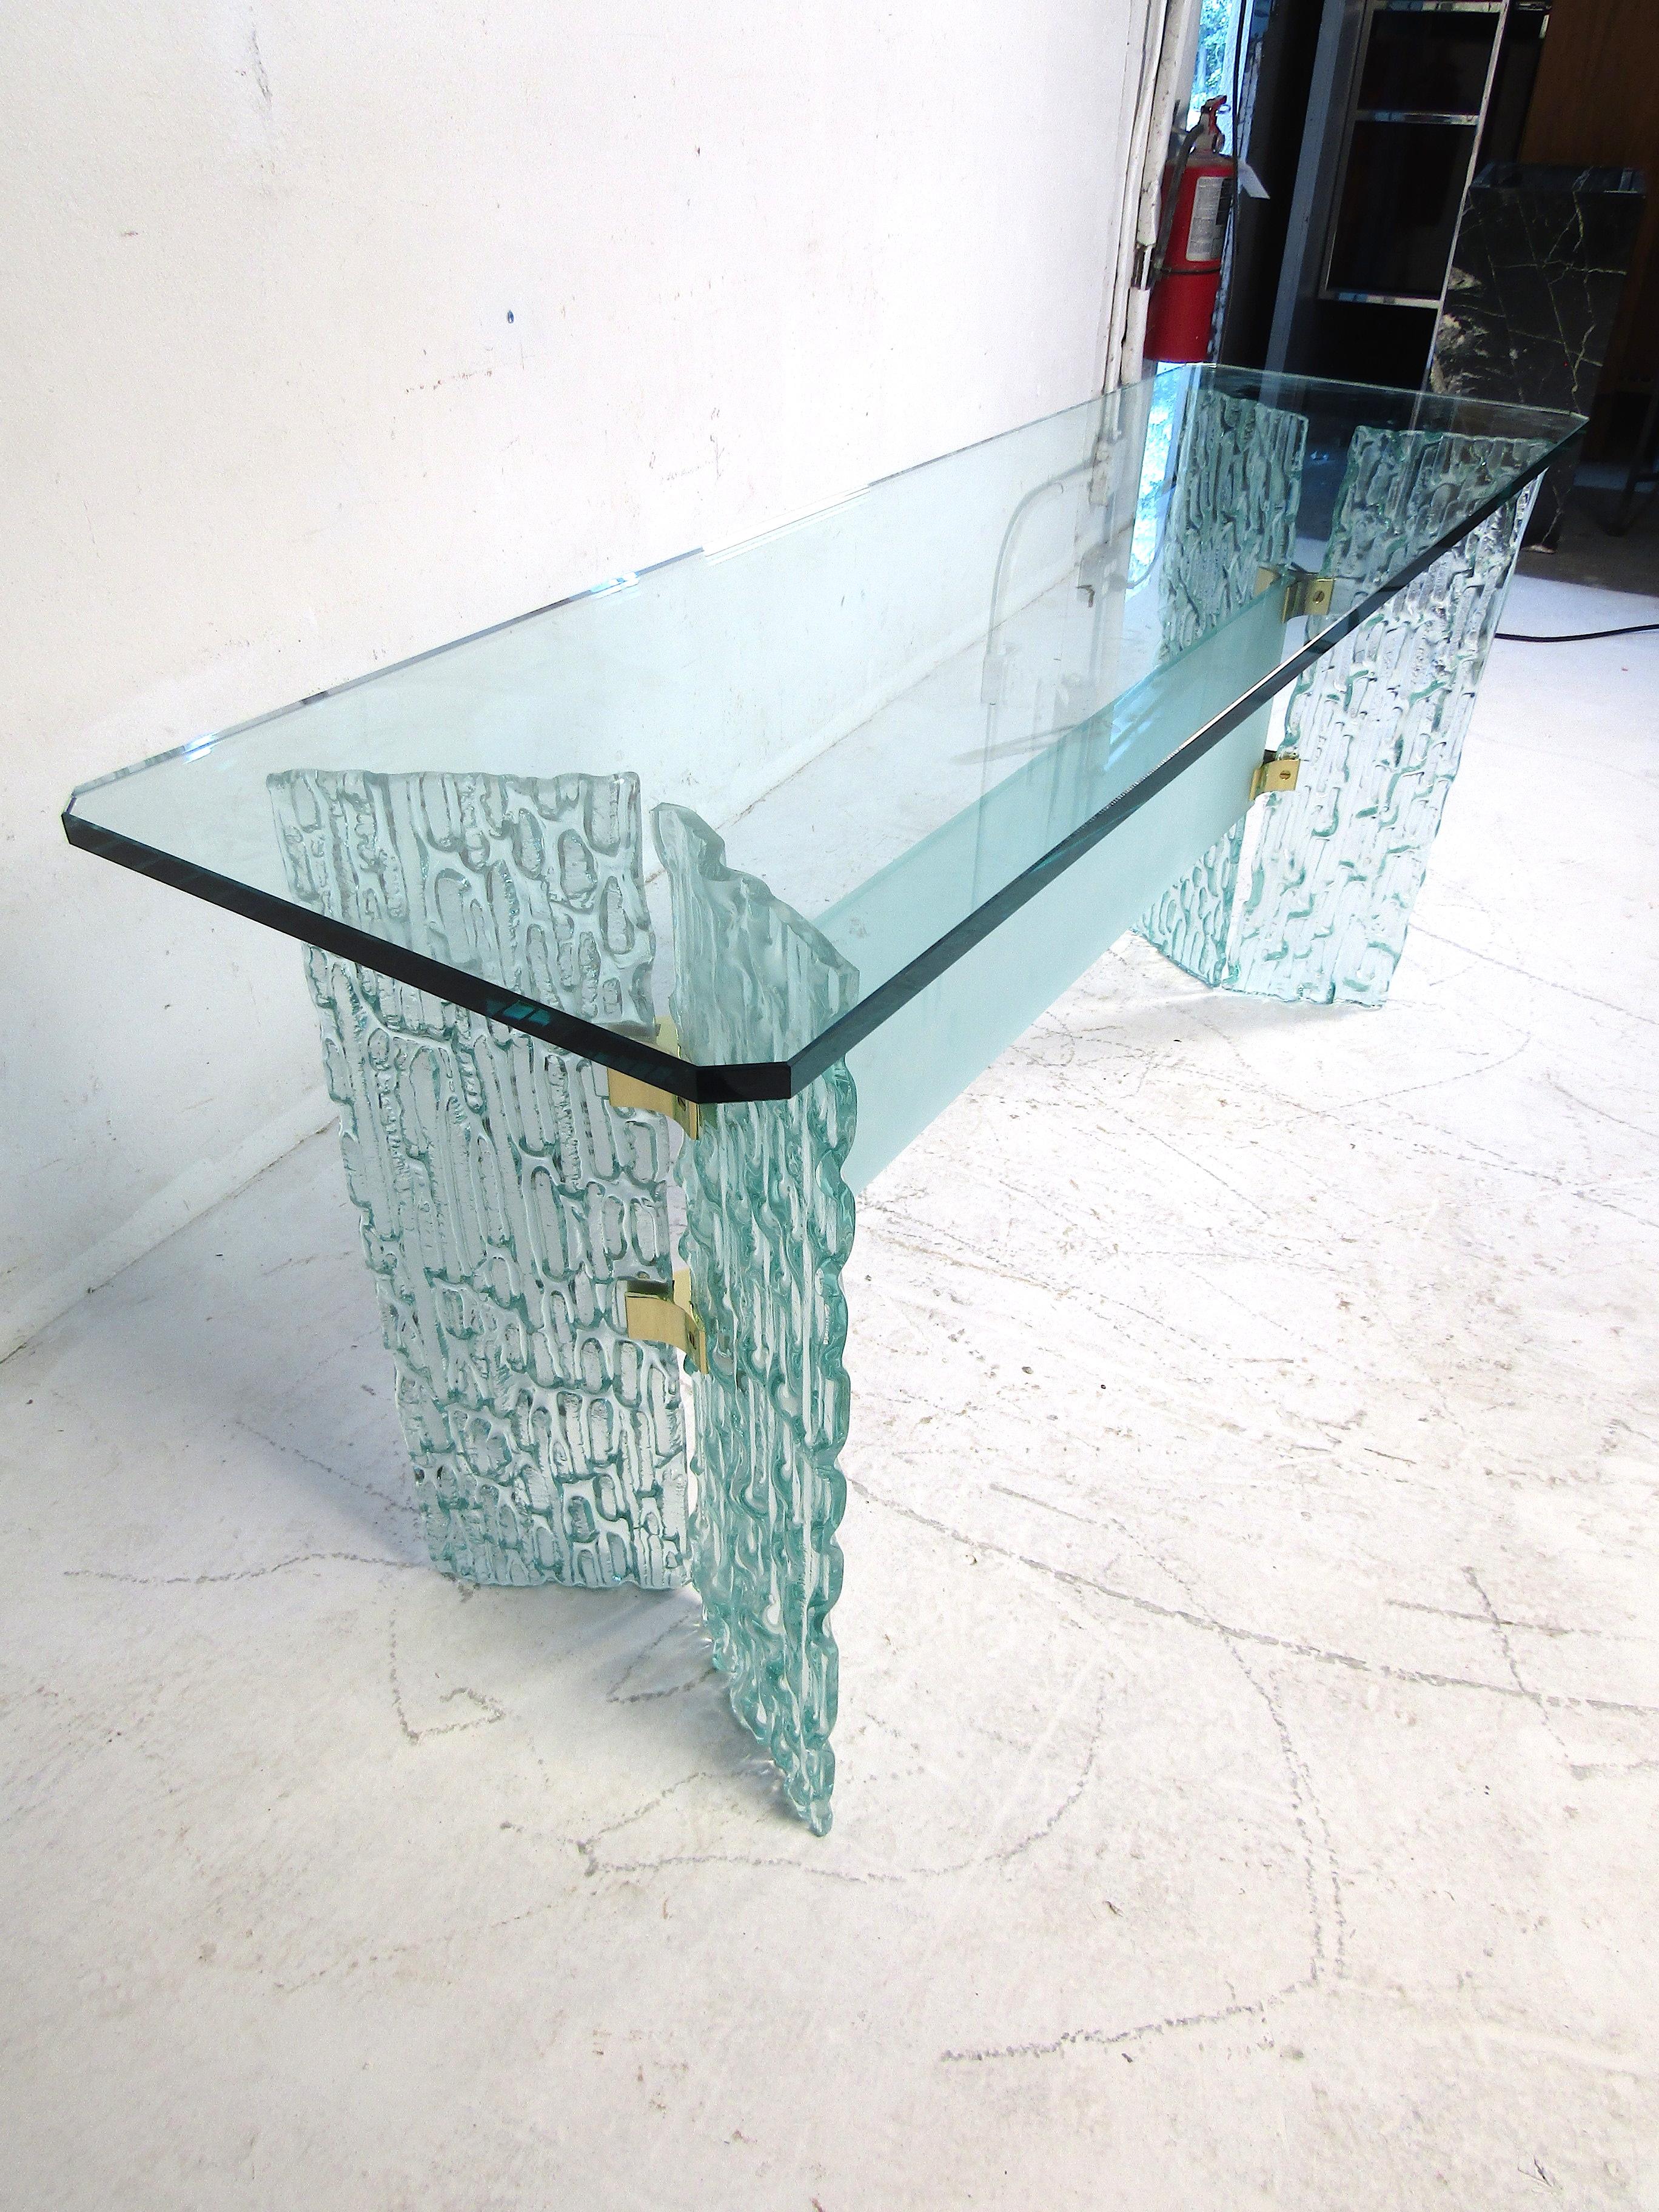 Very unusual console or hallway table. The components are almost entirely made of glass. Interestingly shaped bases with brass hardware support the 3/4 inch pane of beveled glass which serves as the tabletop. Sure to make an impression in any modern